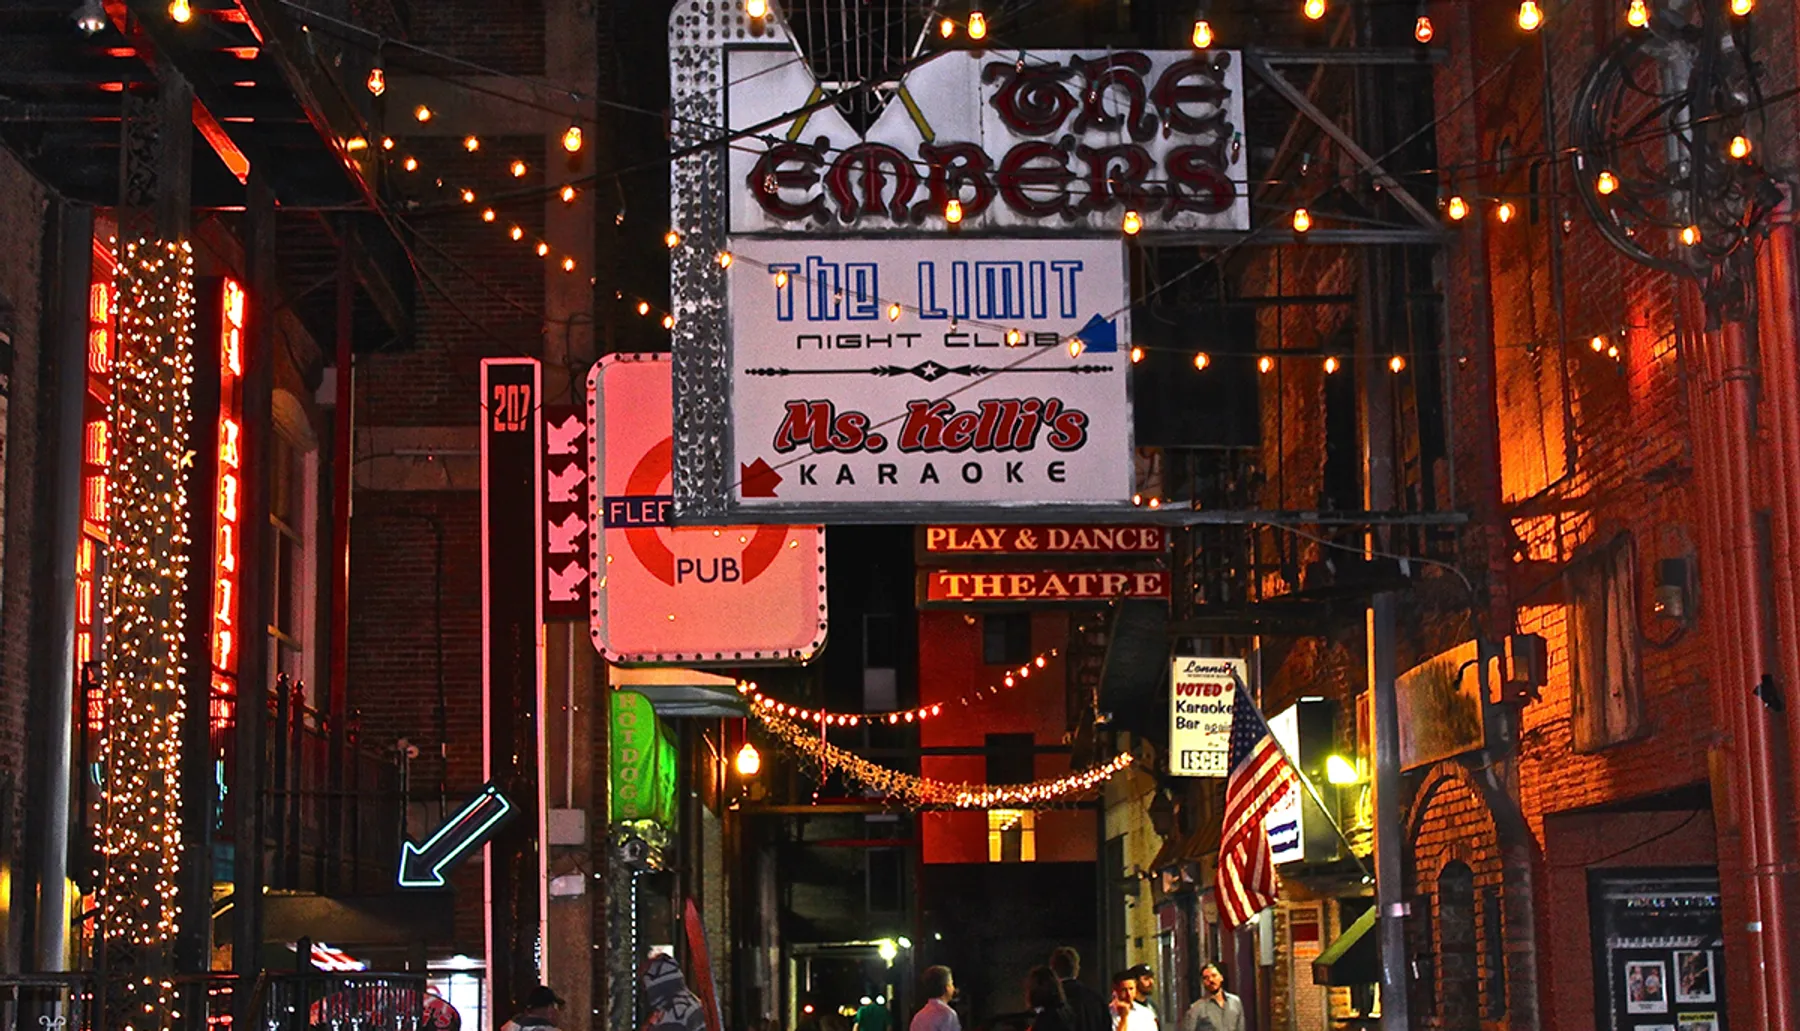 The image shows a vibrant city alley lined with various neon signs for bars, nightclubs, and a karaoke place, creating a lively nightlife ambiance.